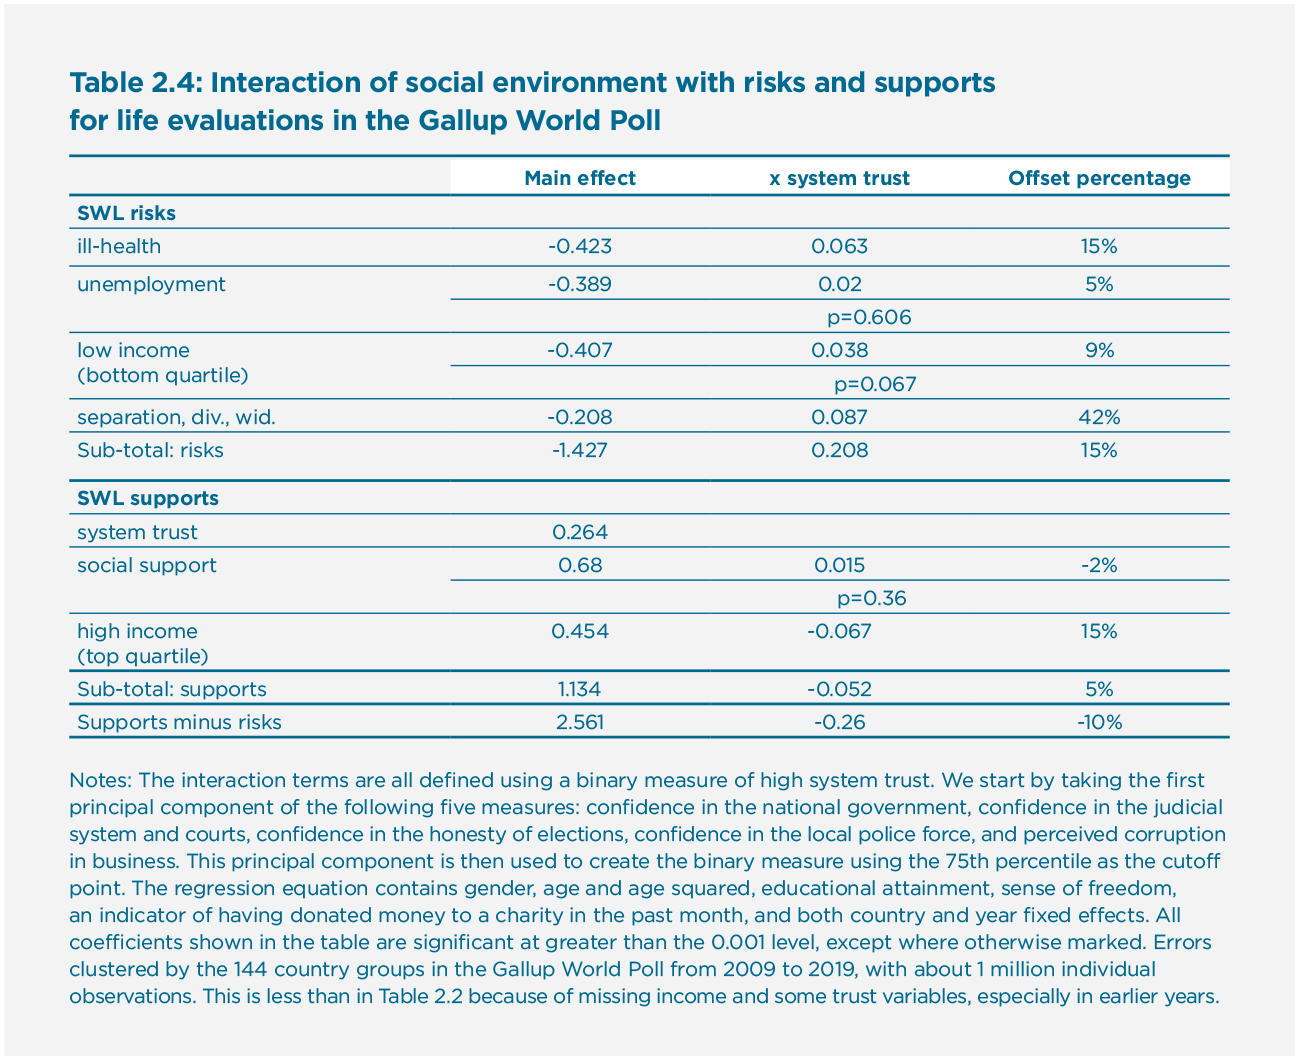 Table 2.4: Interaction of social environment with risks and supports for life evaluations in the Gallup World Poll